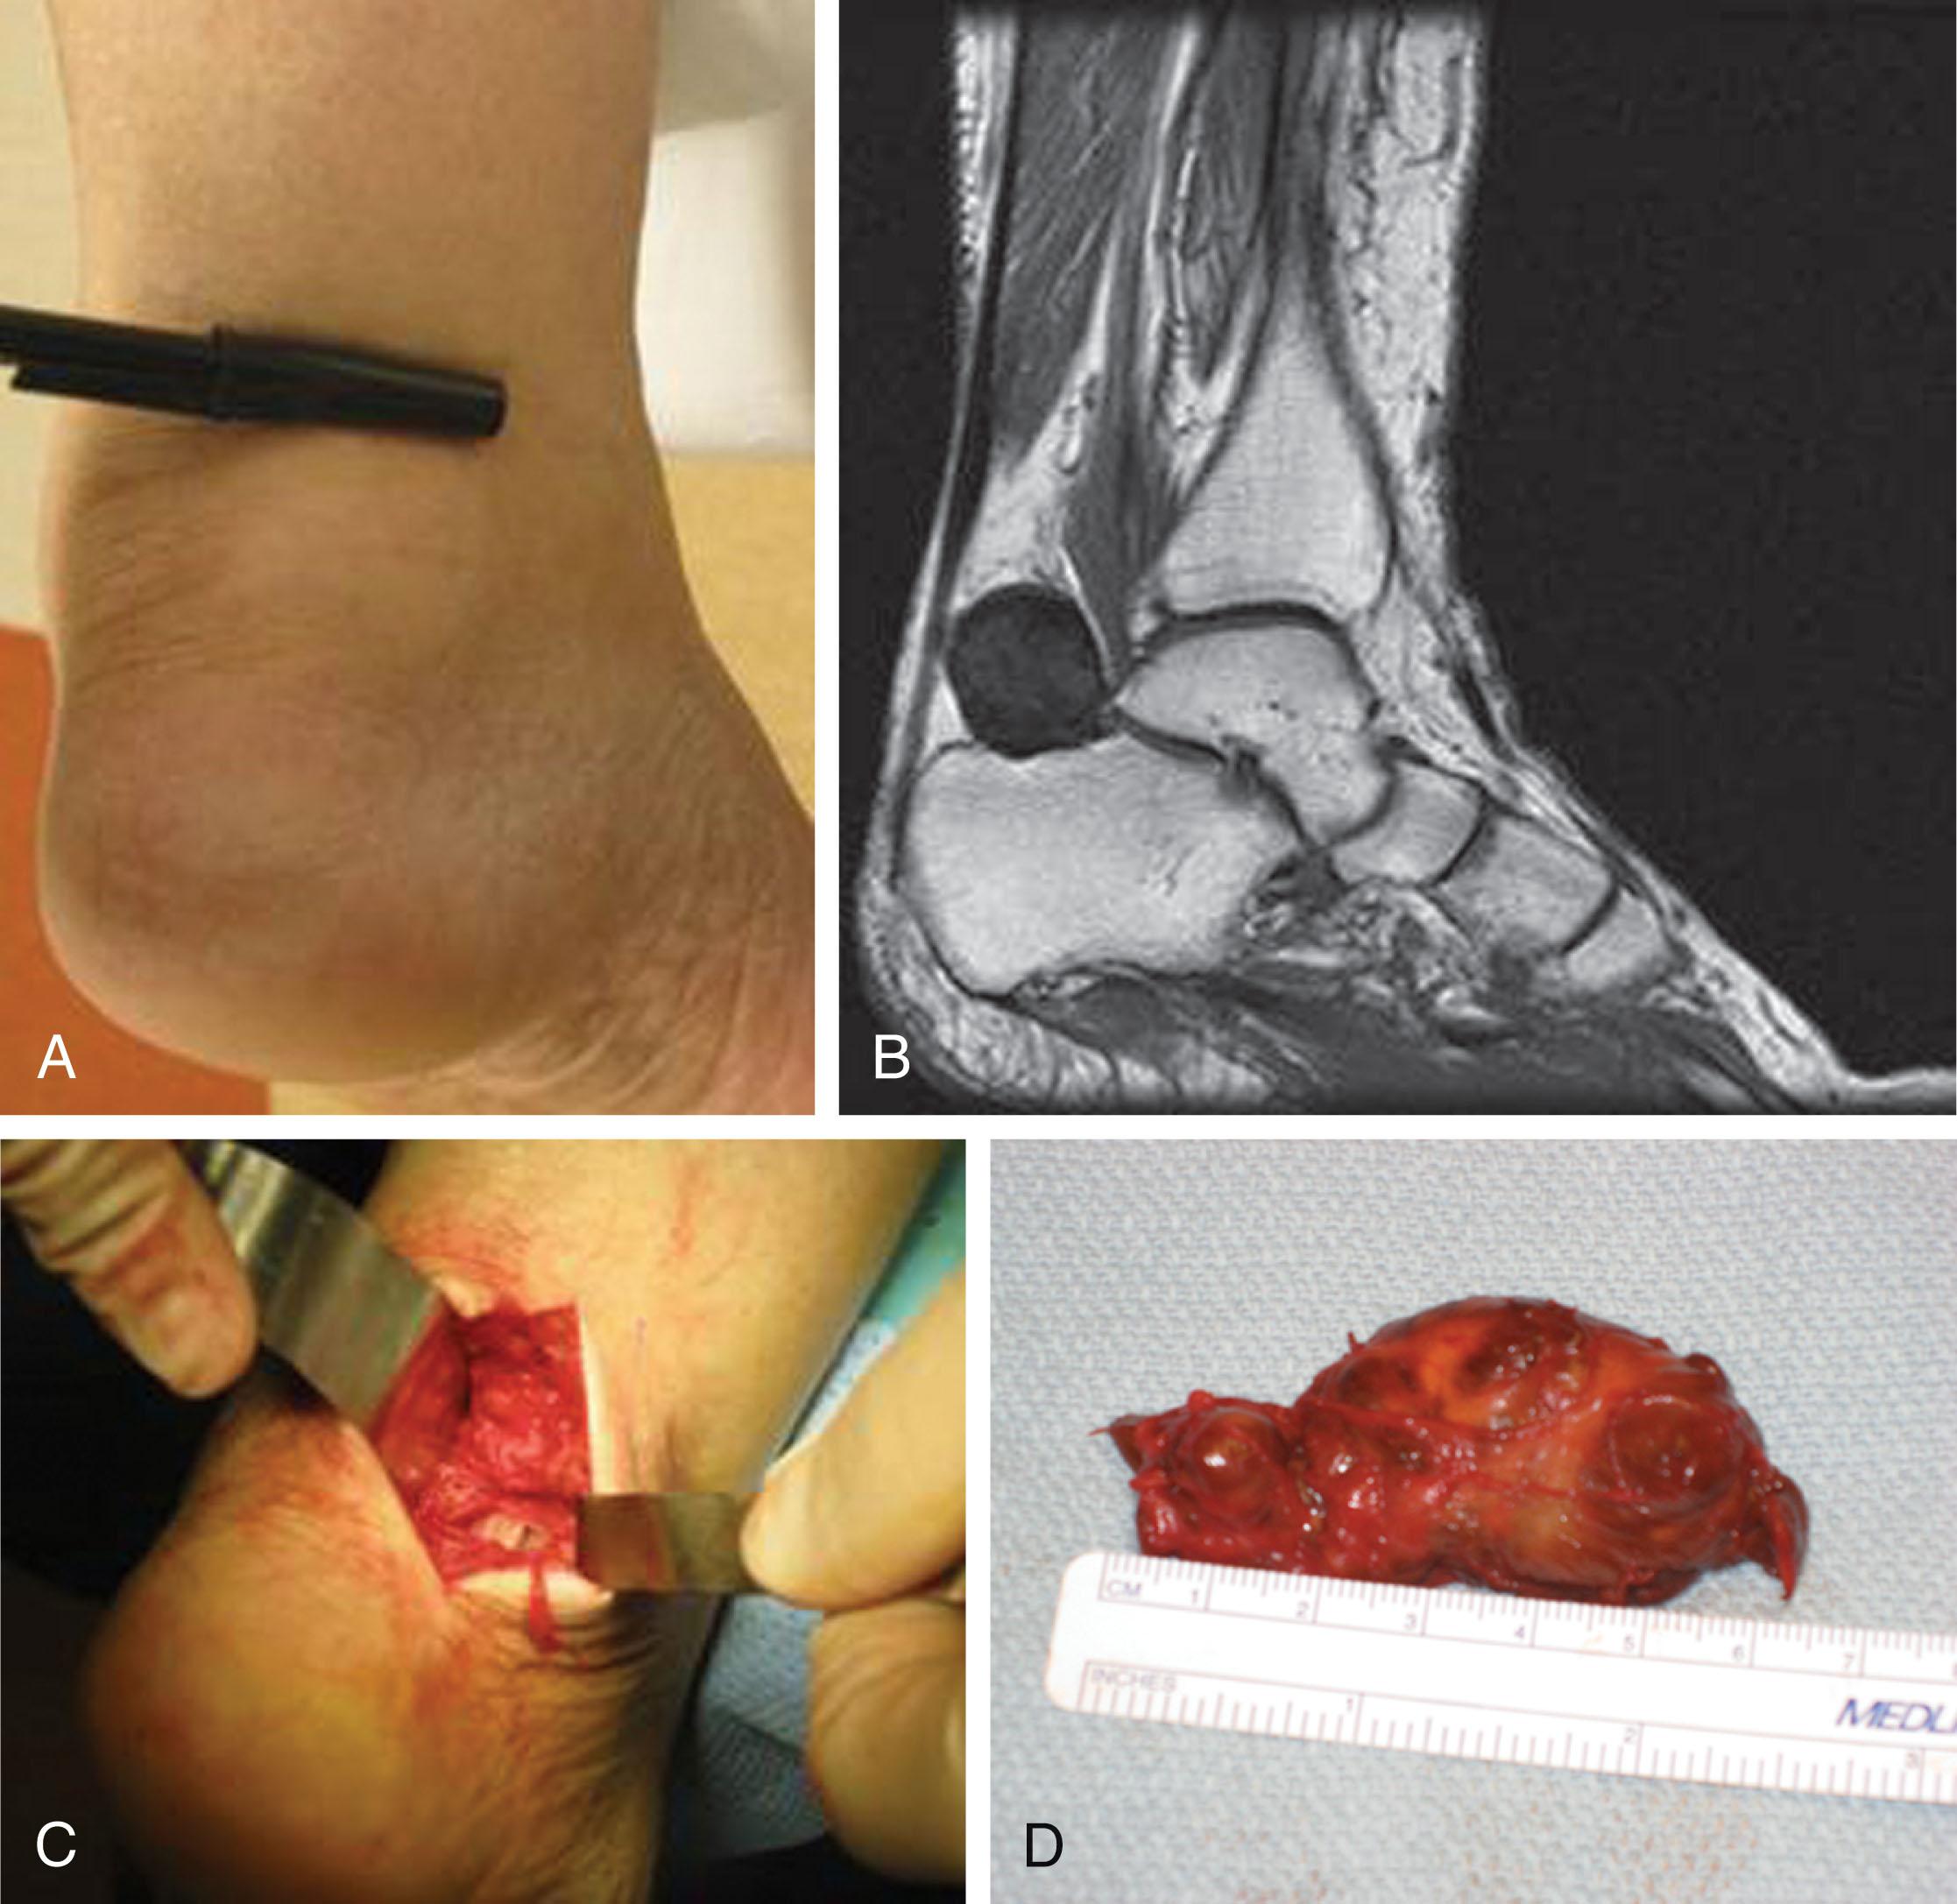 Fig. 28-42, Giant cell tumor of flexor hallucis longus tendon sheath. A , Clinical presentation of soft tissue mass. B , Magnetic resonance image displaying mass on posterior aspect of the medial ankle joint. C , Intraoperative photograph of resection of tumor. D , Resected specimen demonstrating large giant cell tumor.